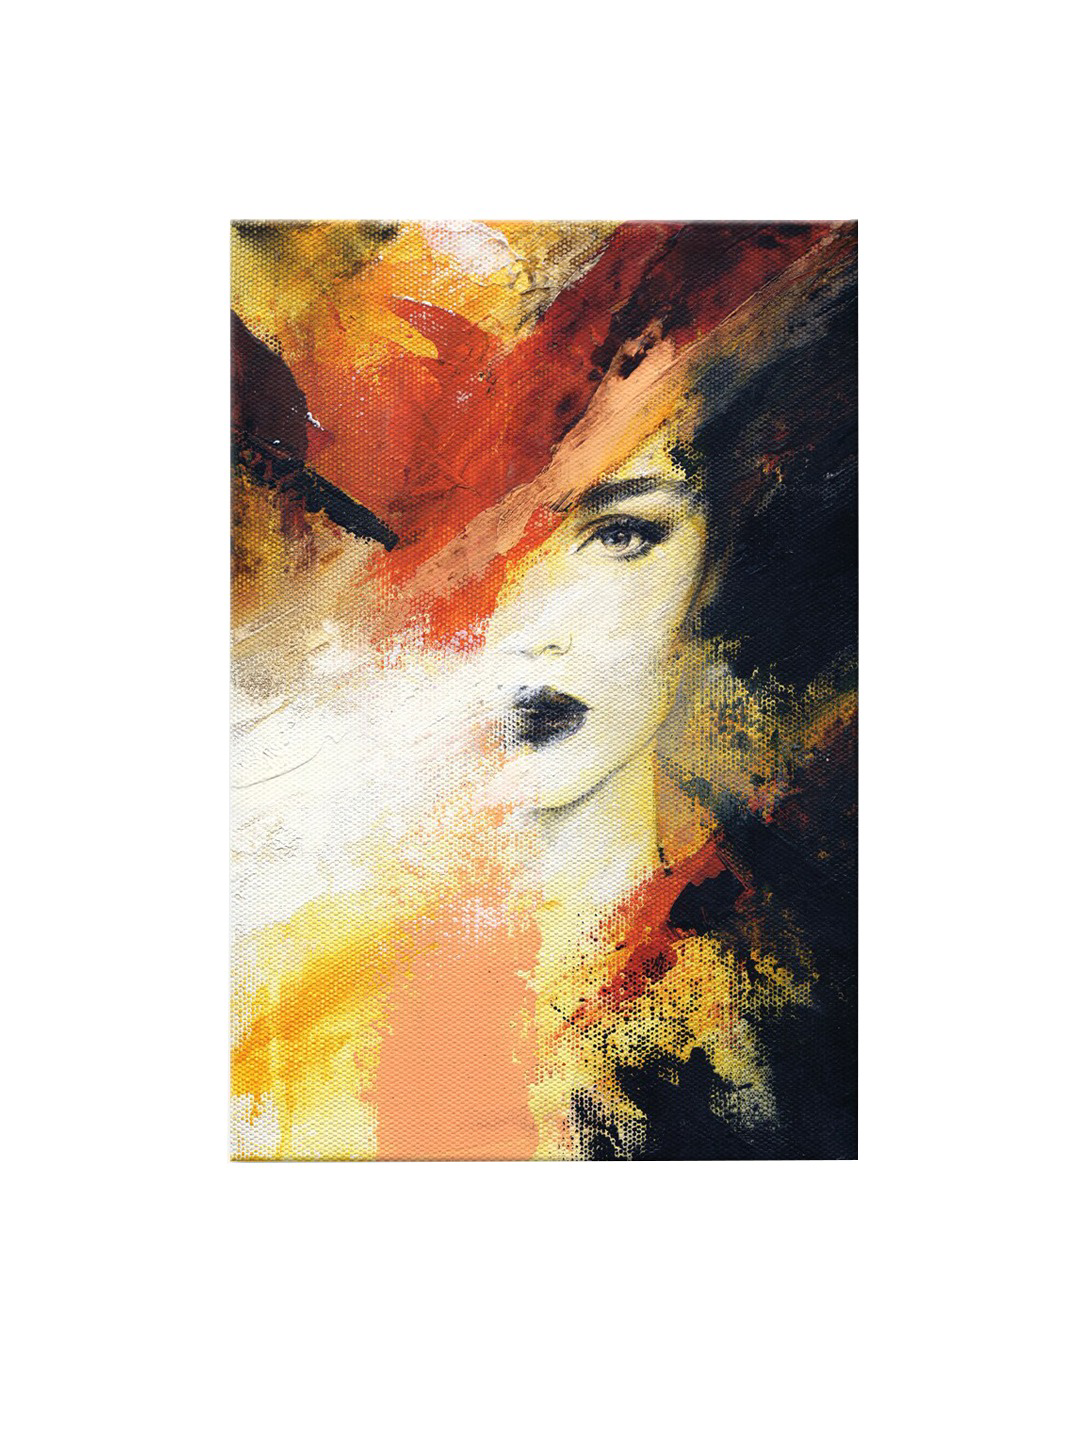 Brown & Black Abstract Lady Canvas Painting Framed Wall Art